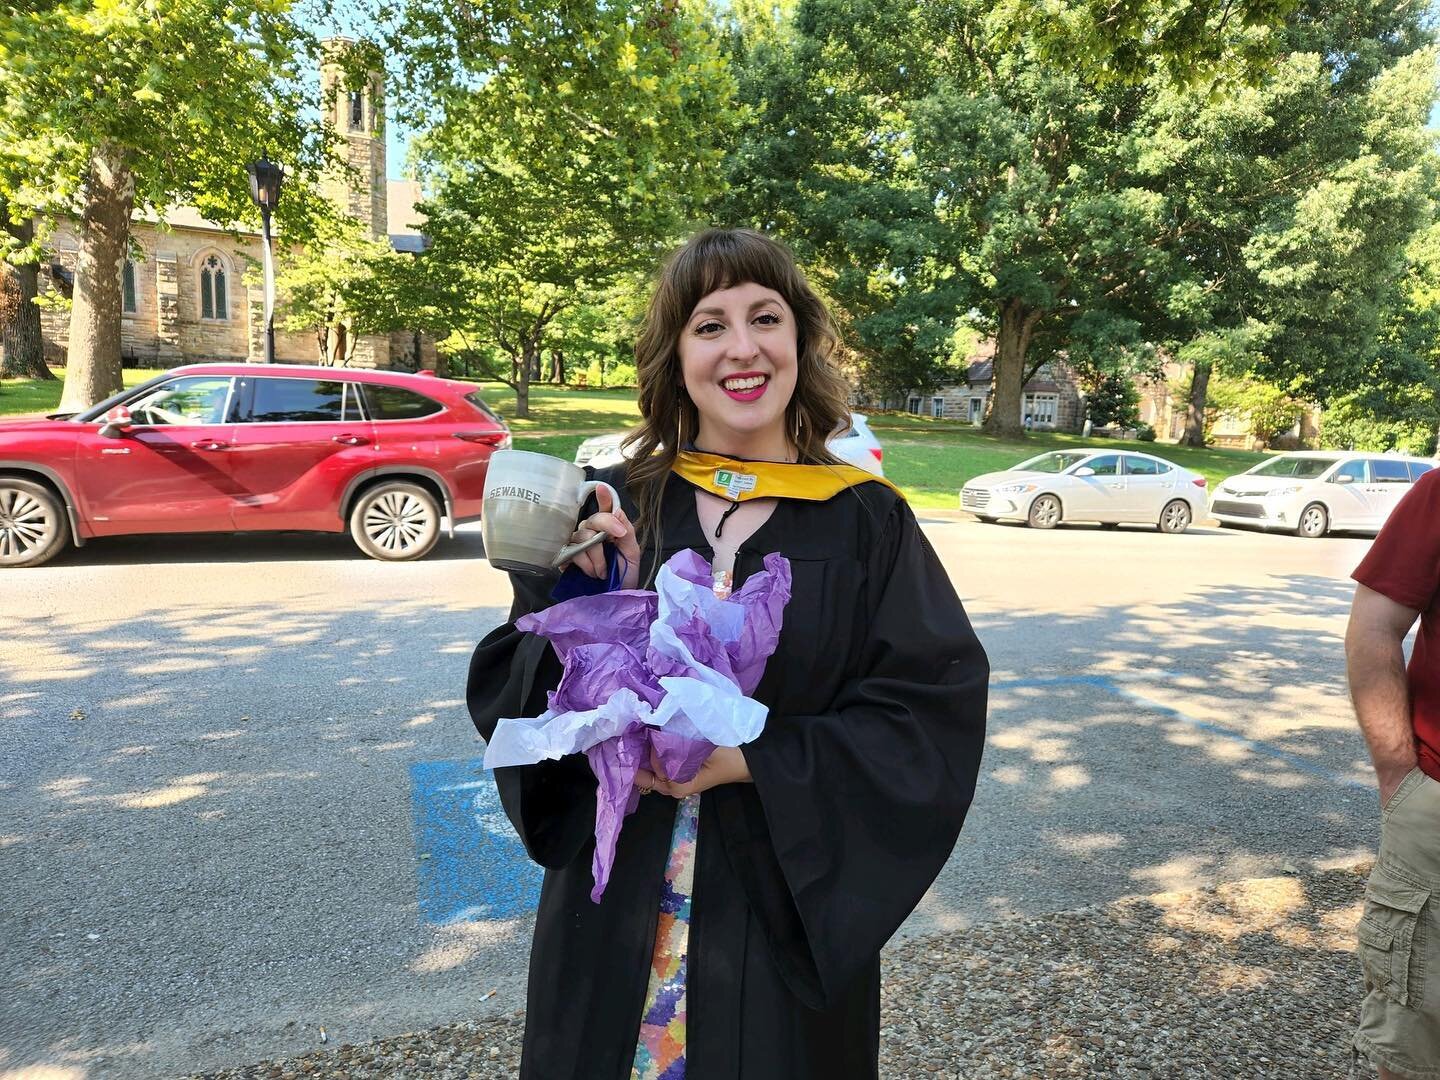 I started my MFA in June of 2016. Over the next six years, I completed all of my coursework and wrote my thesis while working full time&mdash;first for The United Methodist Publishing House, then for BookPage. My last two semesters were online becaus